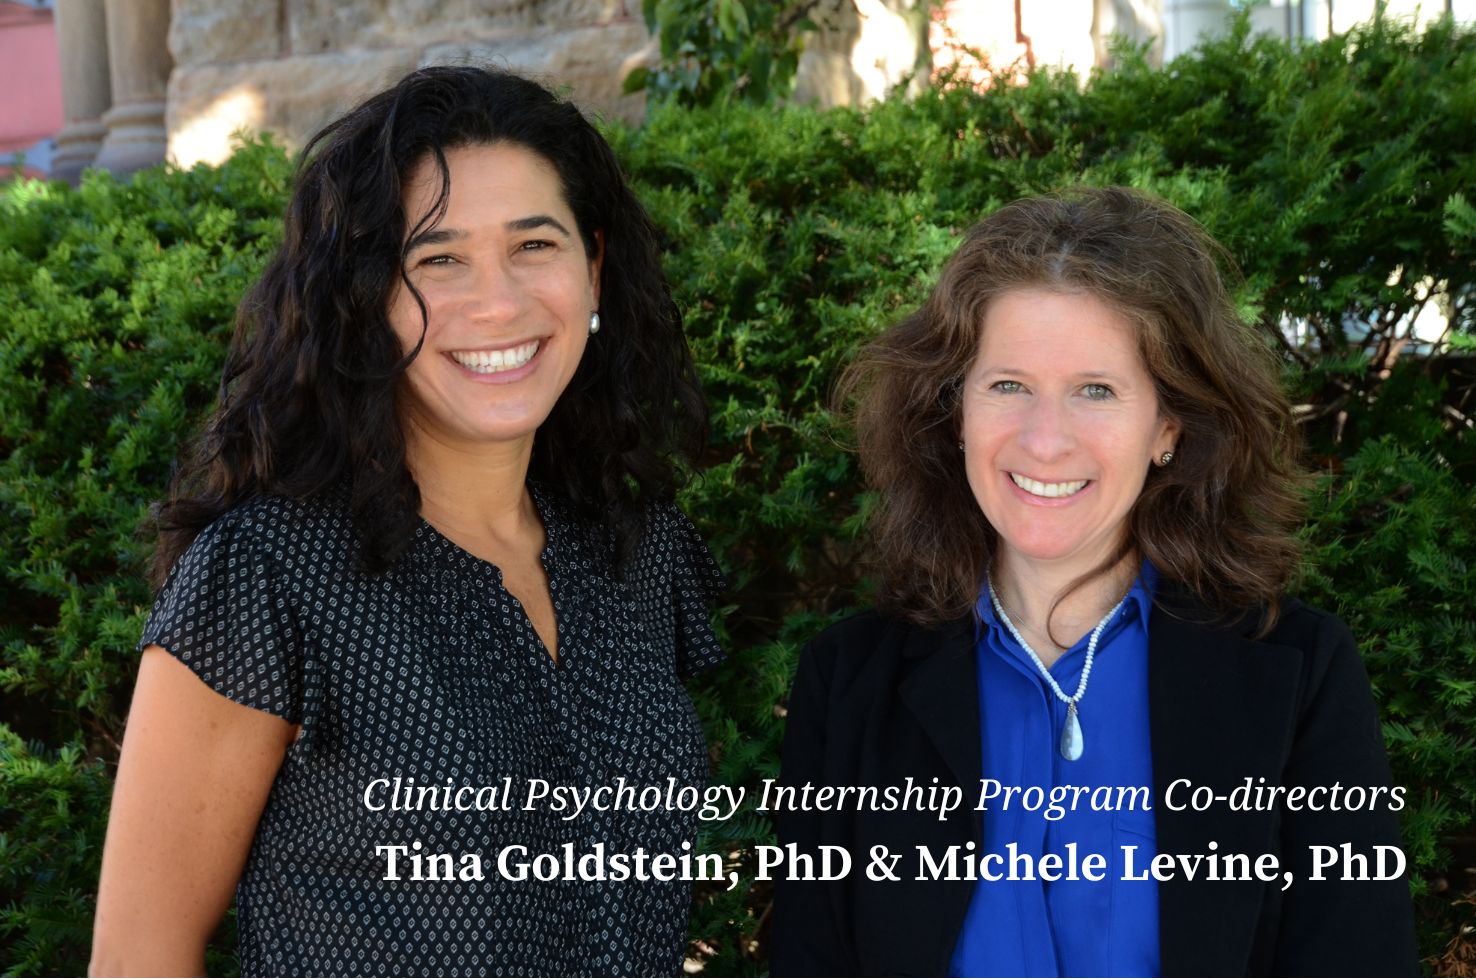 Drs. Tina Goldstein & Michele Levine Direct the Clinical Psychology Internship